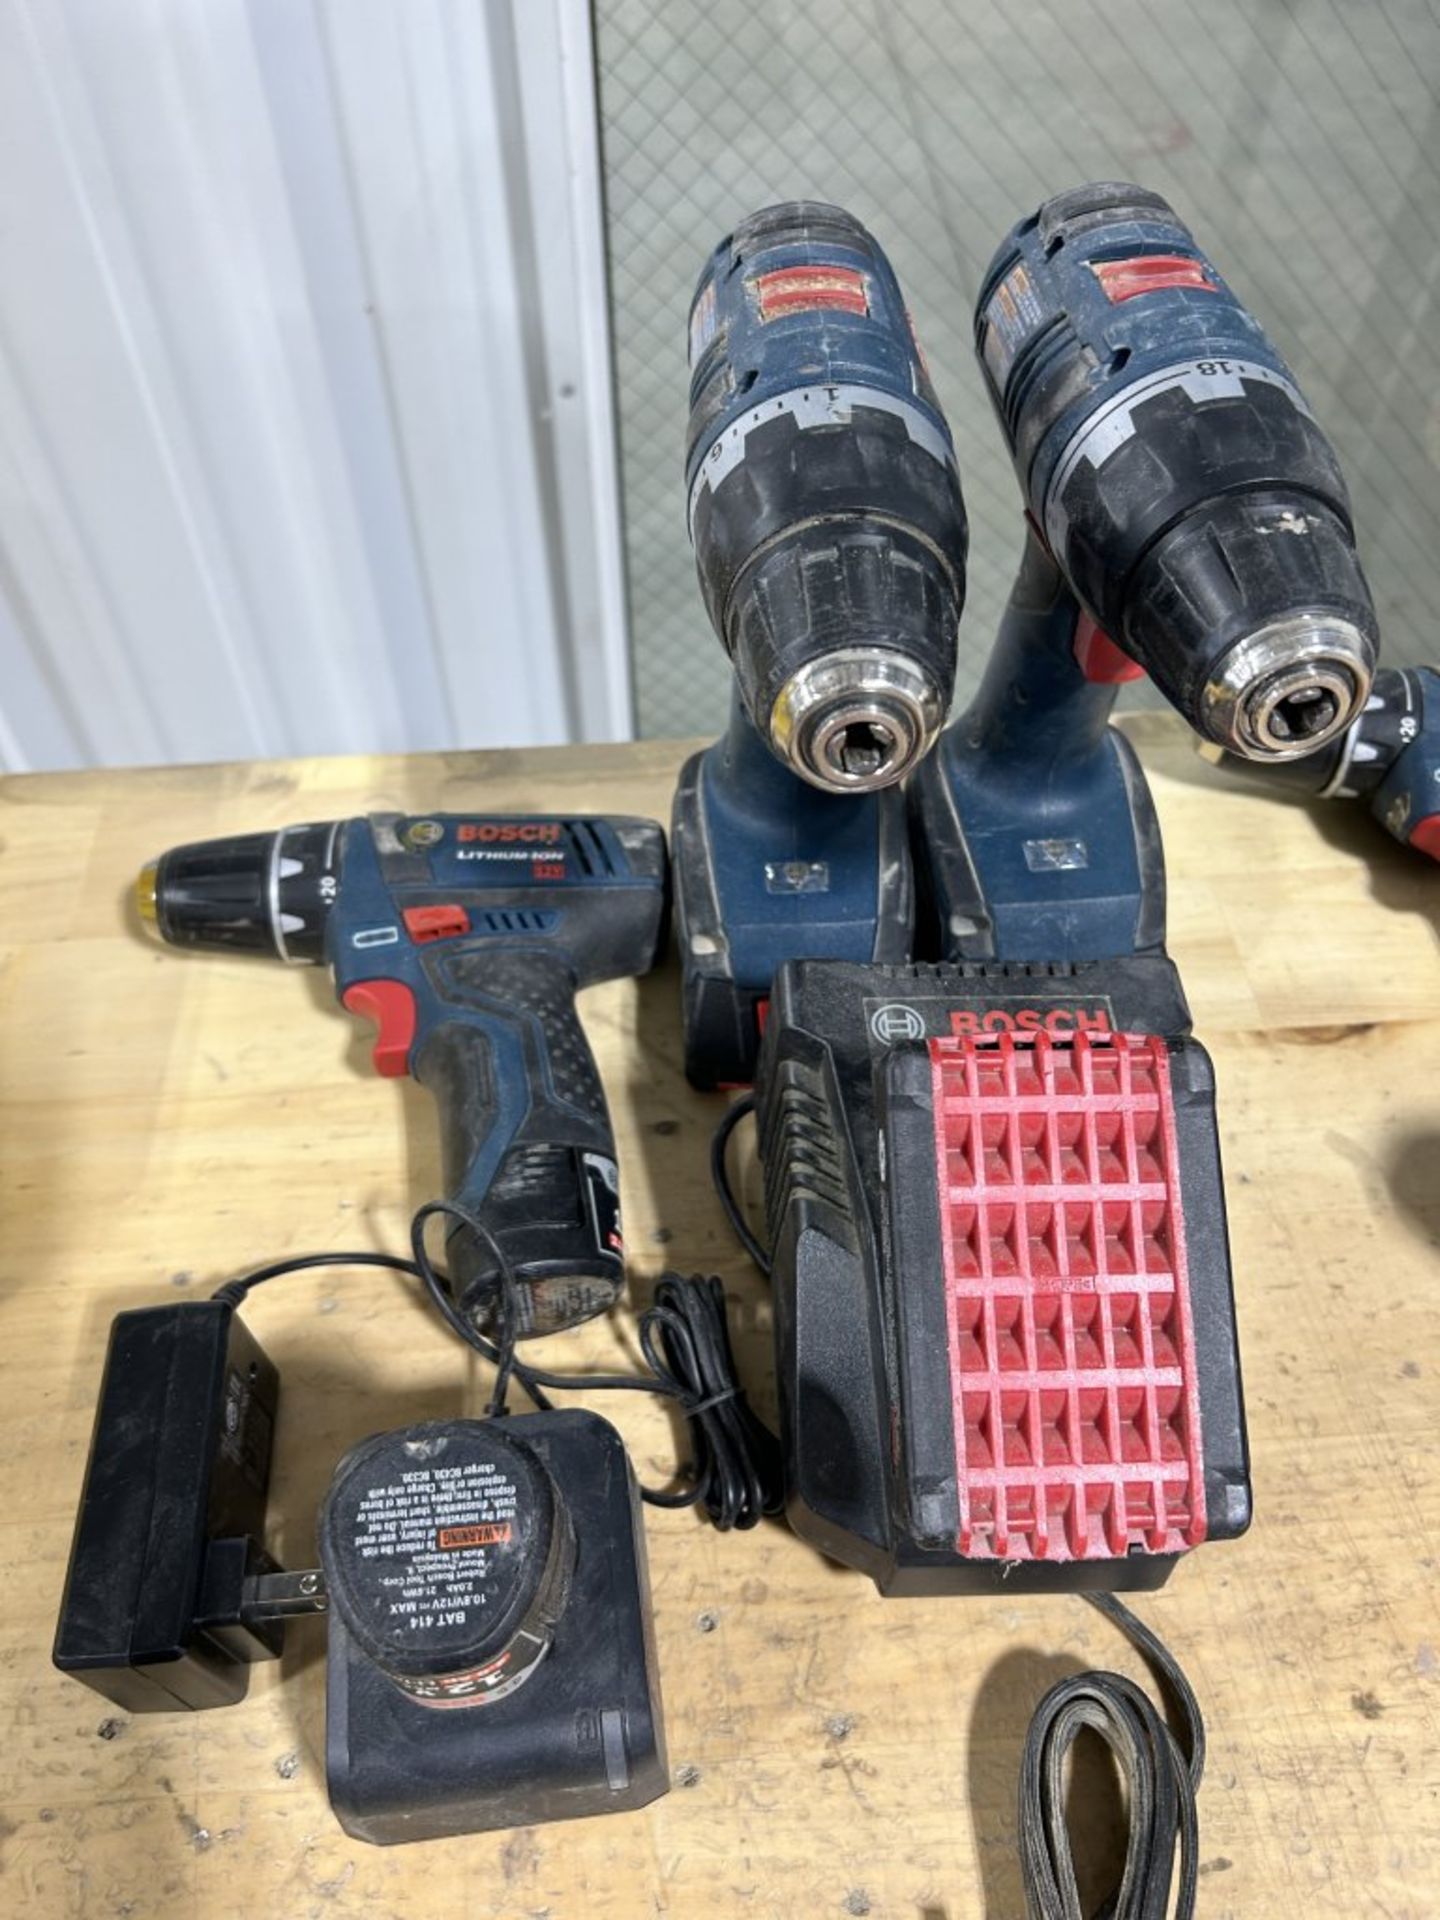 BOSCH LITHIUM ION 18V & 12V CORDLESS DRILLS, WITH BATTERIES AND CHARGER, AND (1) BOSCH LITHIUM ION